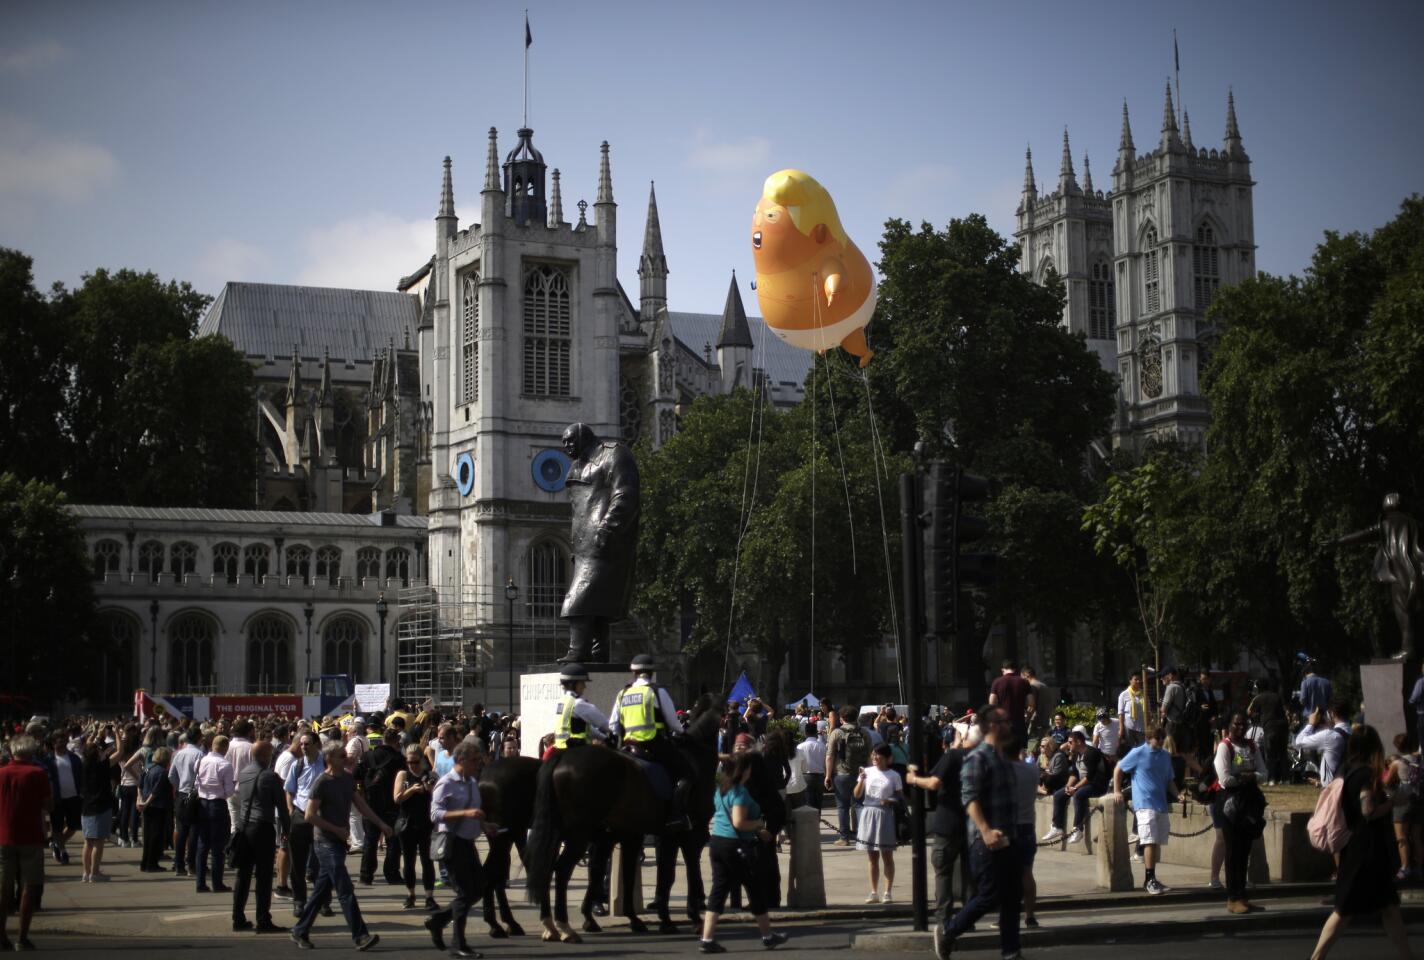 A 20-foot tall balloon depicting U.S. President Donald Trump as a screaming baby hovers next to the statue of former British Prime Minister Winston Churchill in Parliament Square in London.